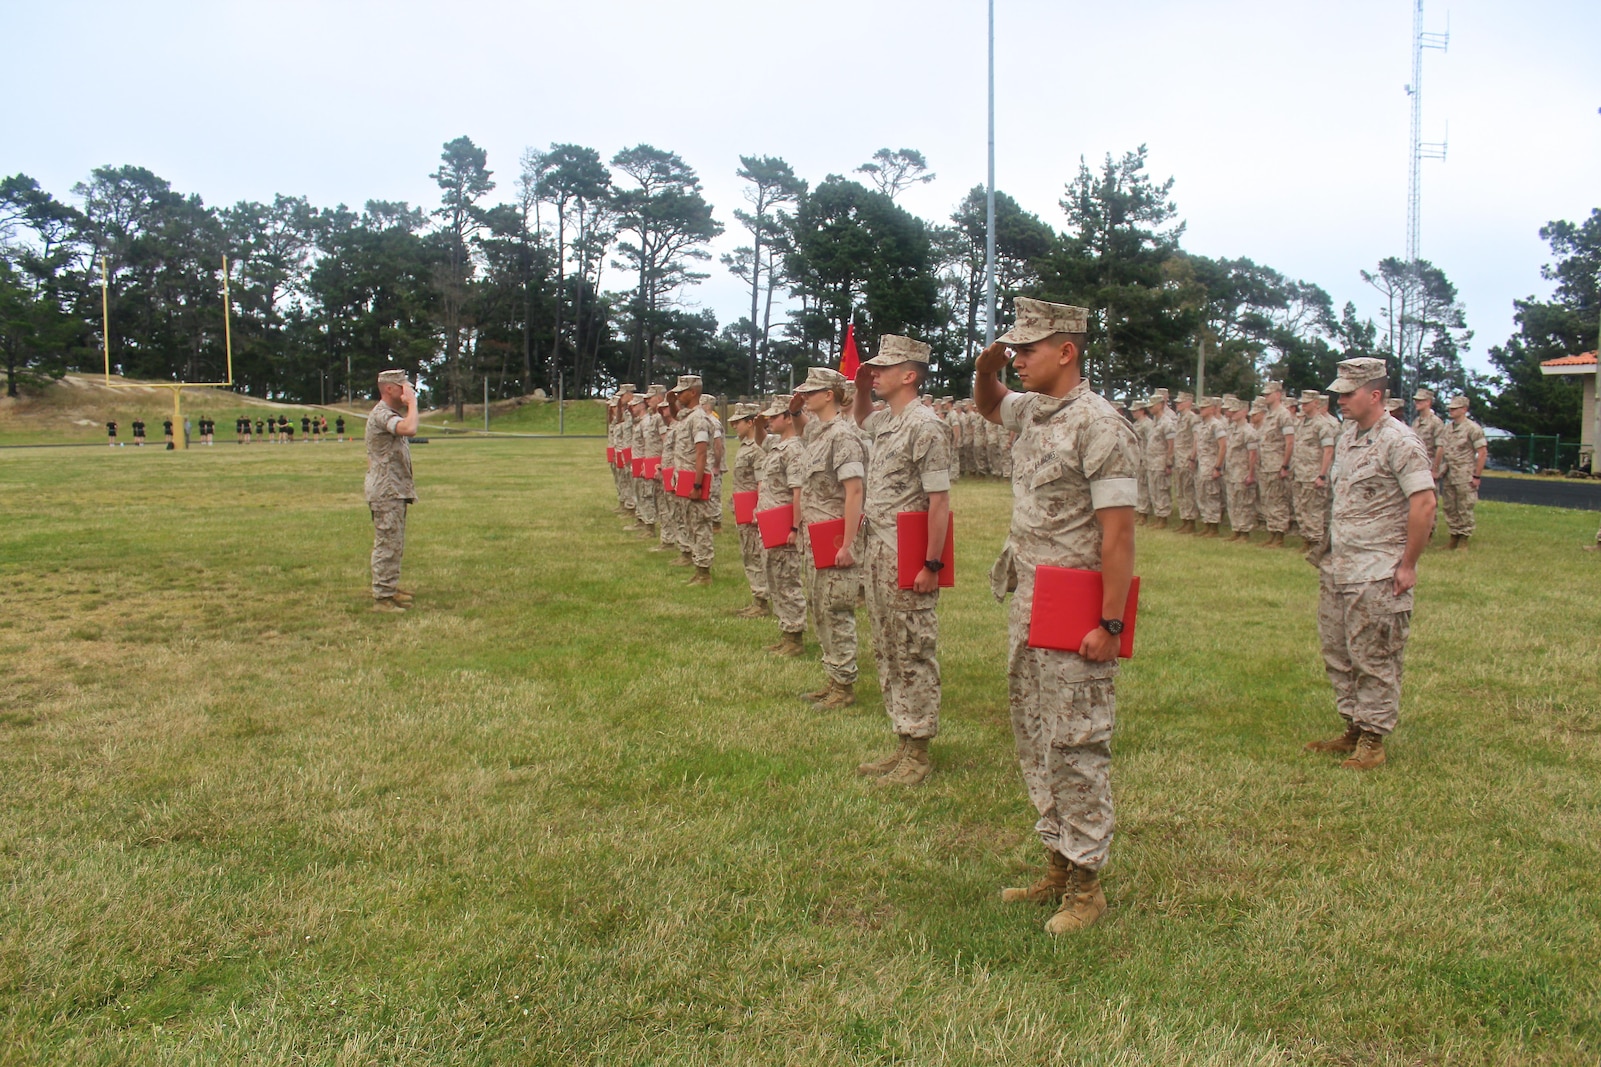 The Marine Corps Detachment's newest Lance Corporals and Privates First Class salute after being promoted during a promotion formation held on 1 May, 2016.